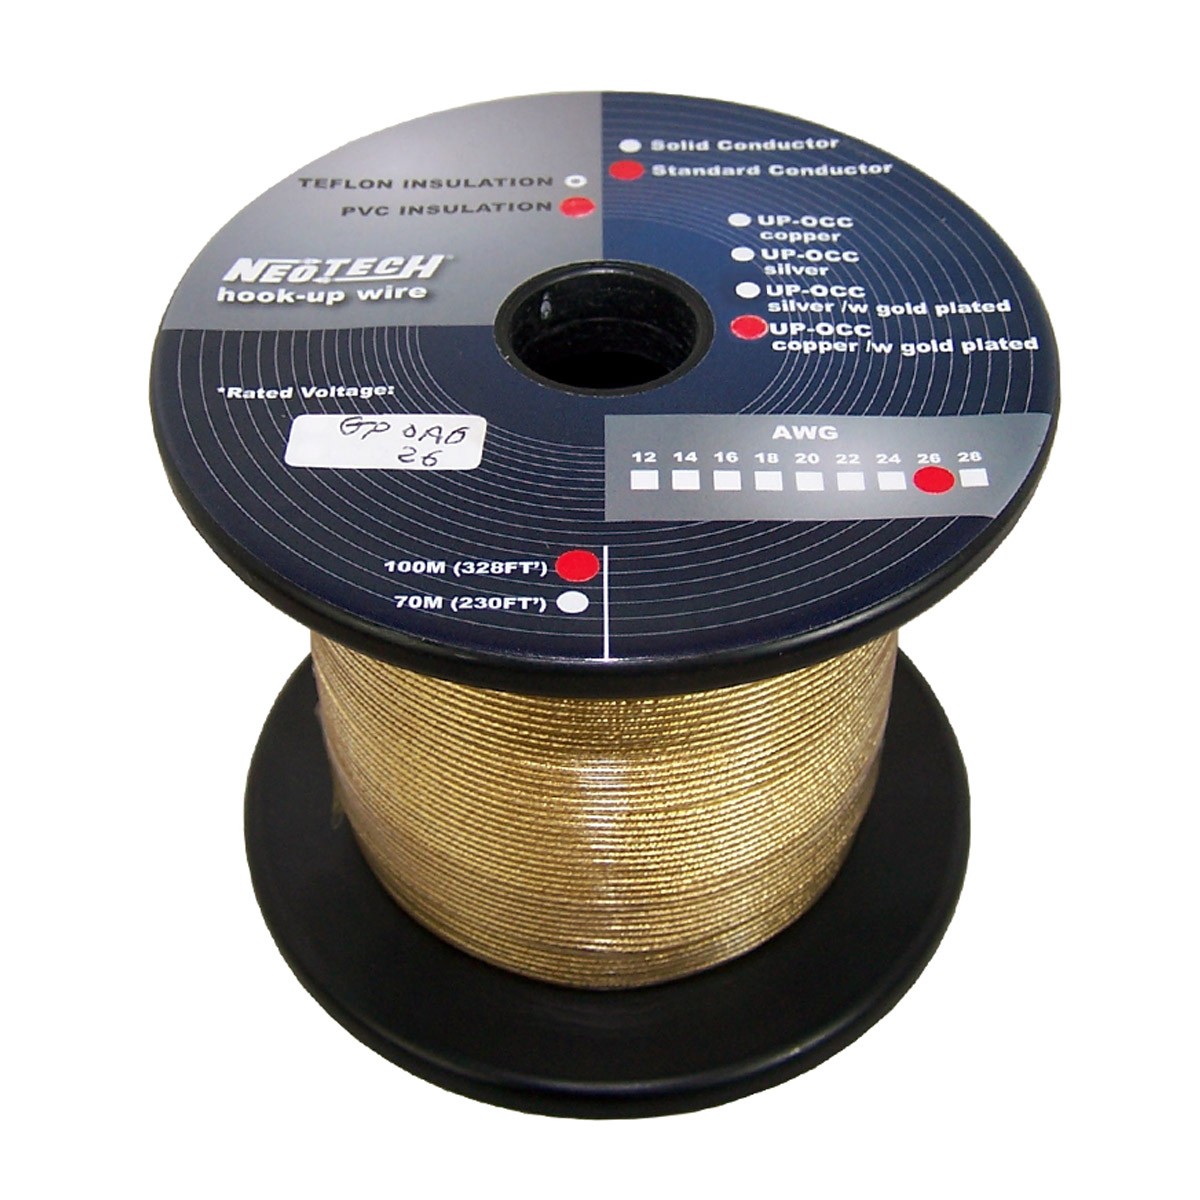 NEOTECH GP-OCG-24 Wiring Cable Gold Plated UP-OCC Copper 0.205mm²